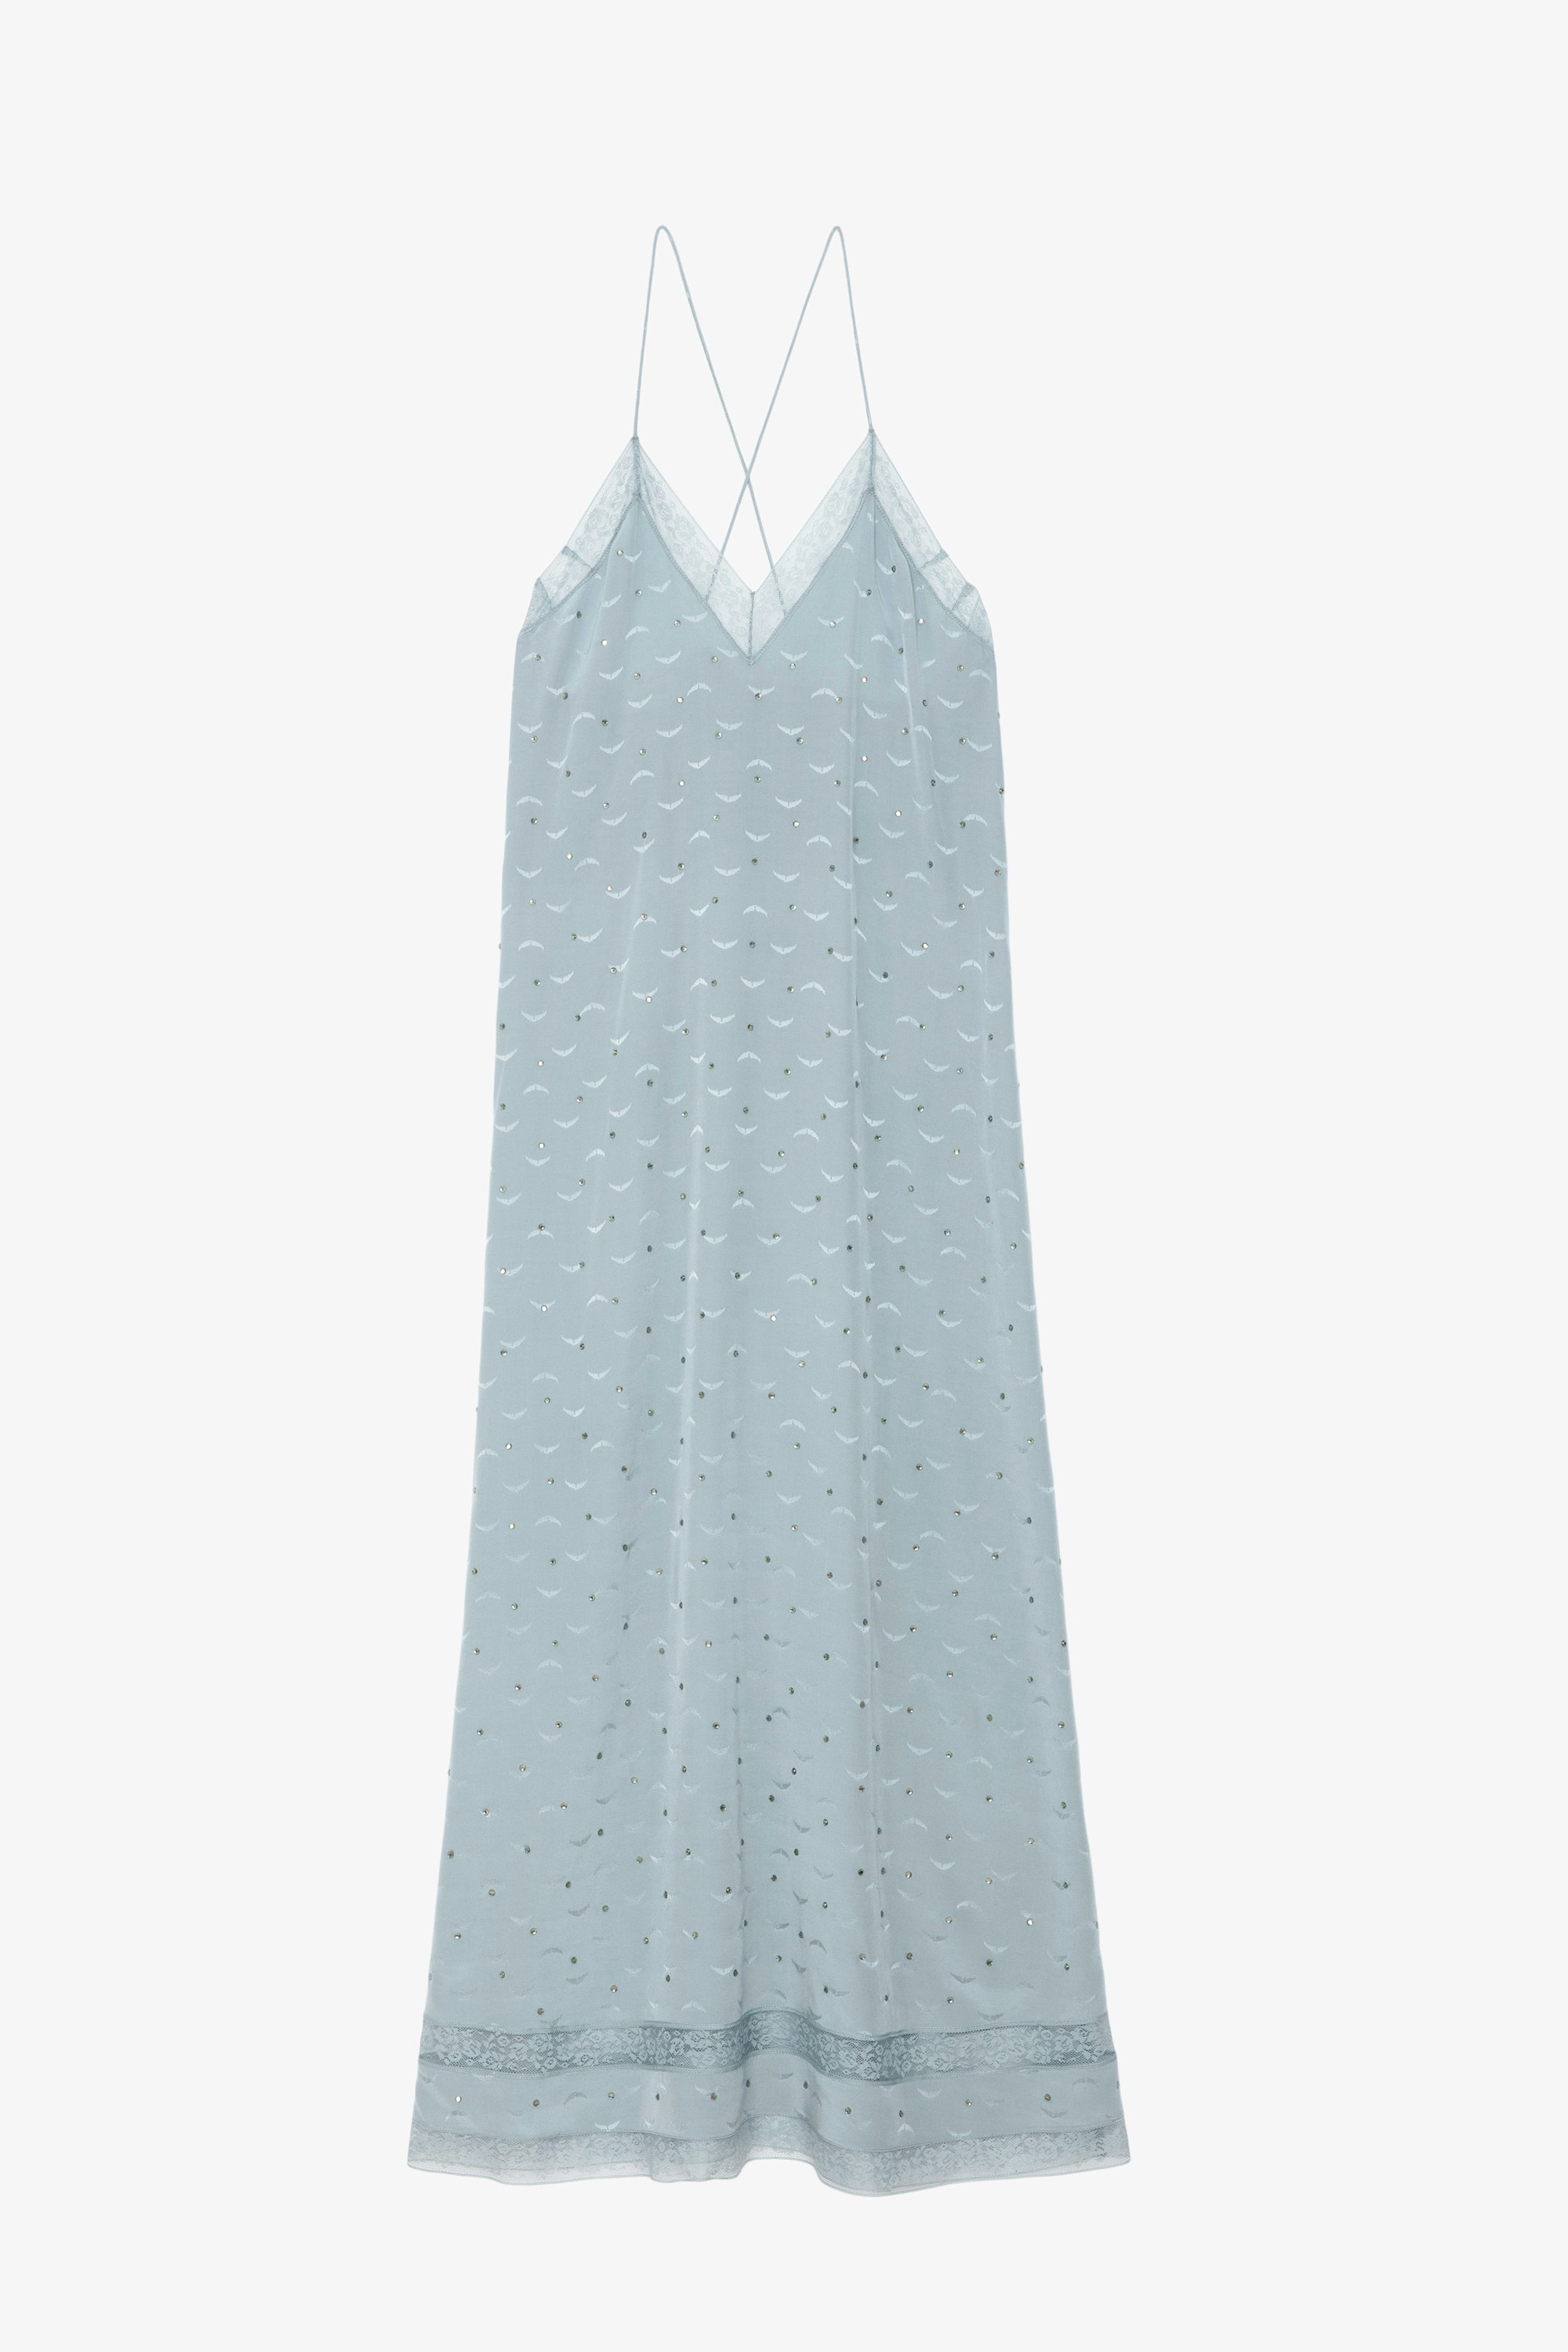 Reman Silk Jacquard Dress - Sky blue silk lingerie-style long dress with jacquard wings, diamanté, lace and tie at the back.